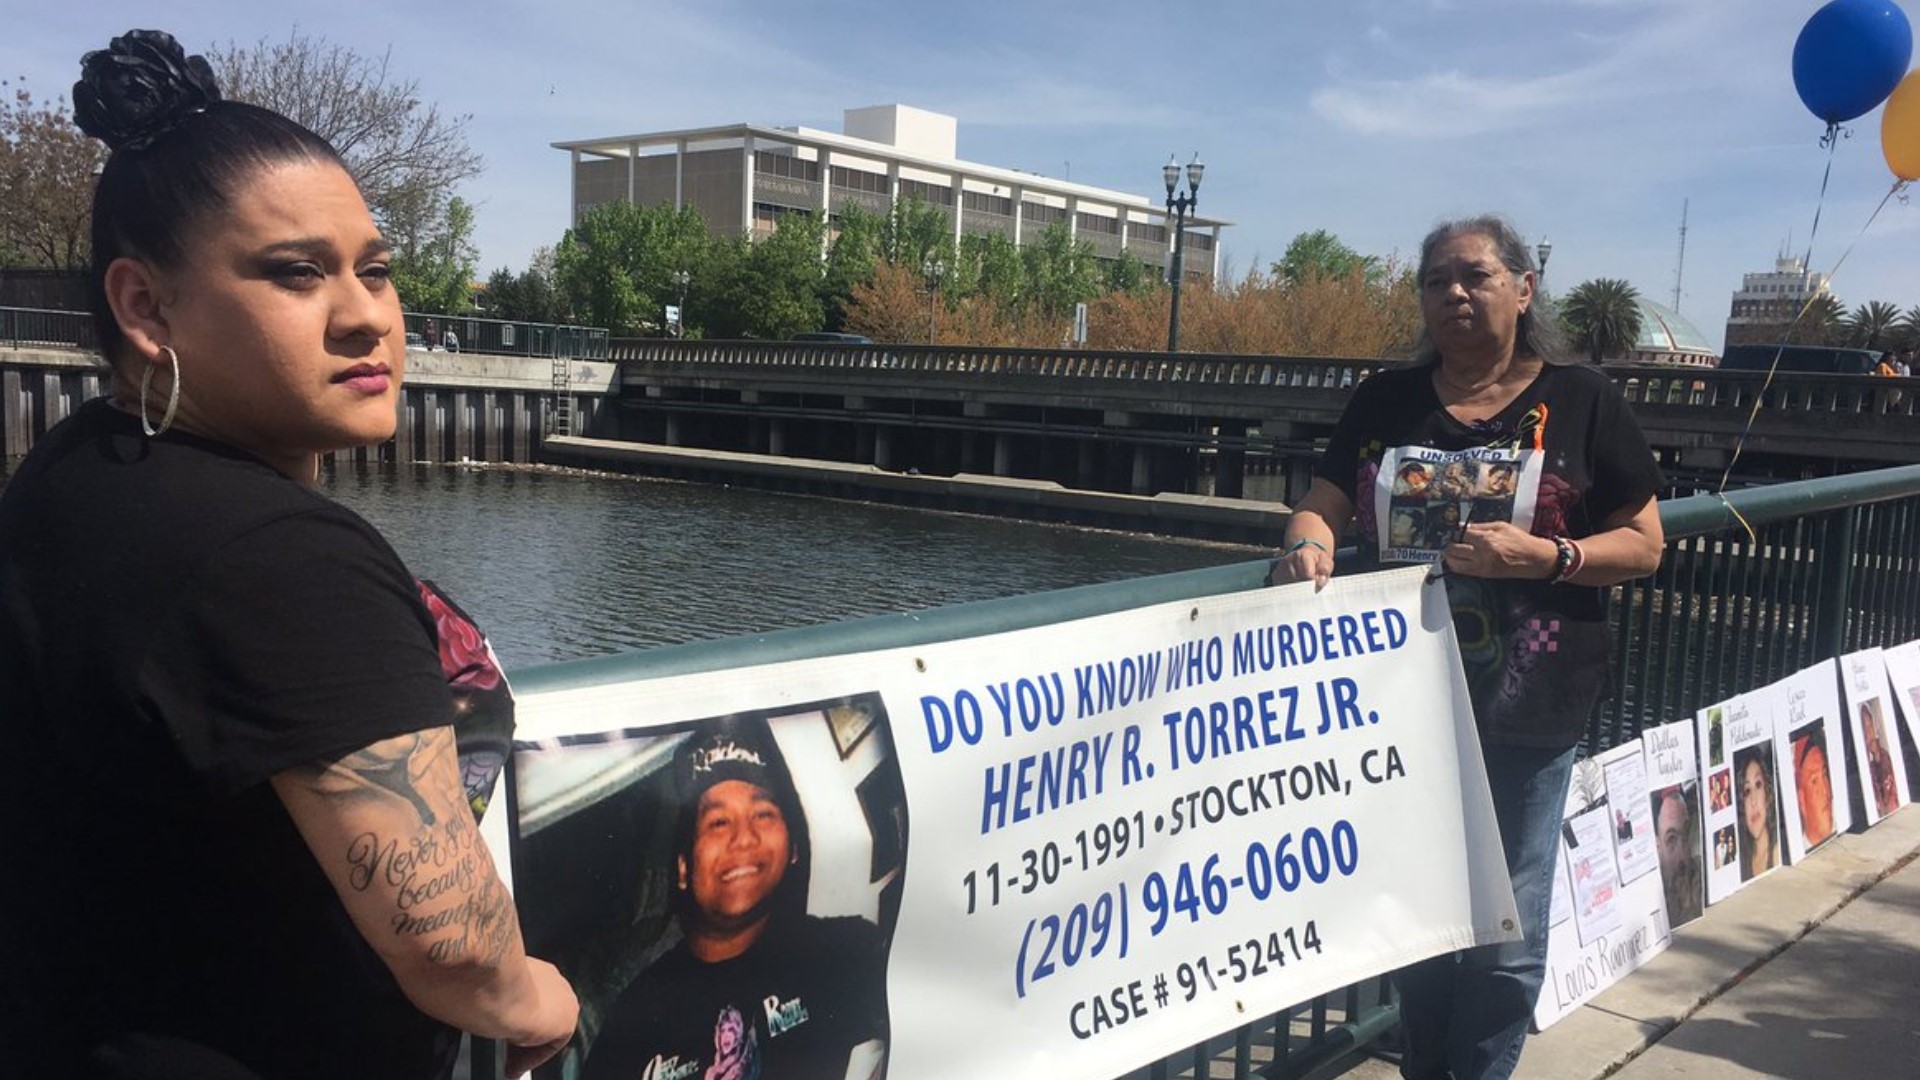 Those who lost a loved one to murder gathered in Stockton to walk in solidarity for others who have endured similar hardships. For some families, the effort helps keep the memory of their loved one alive.